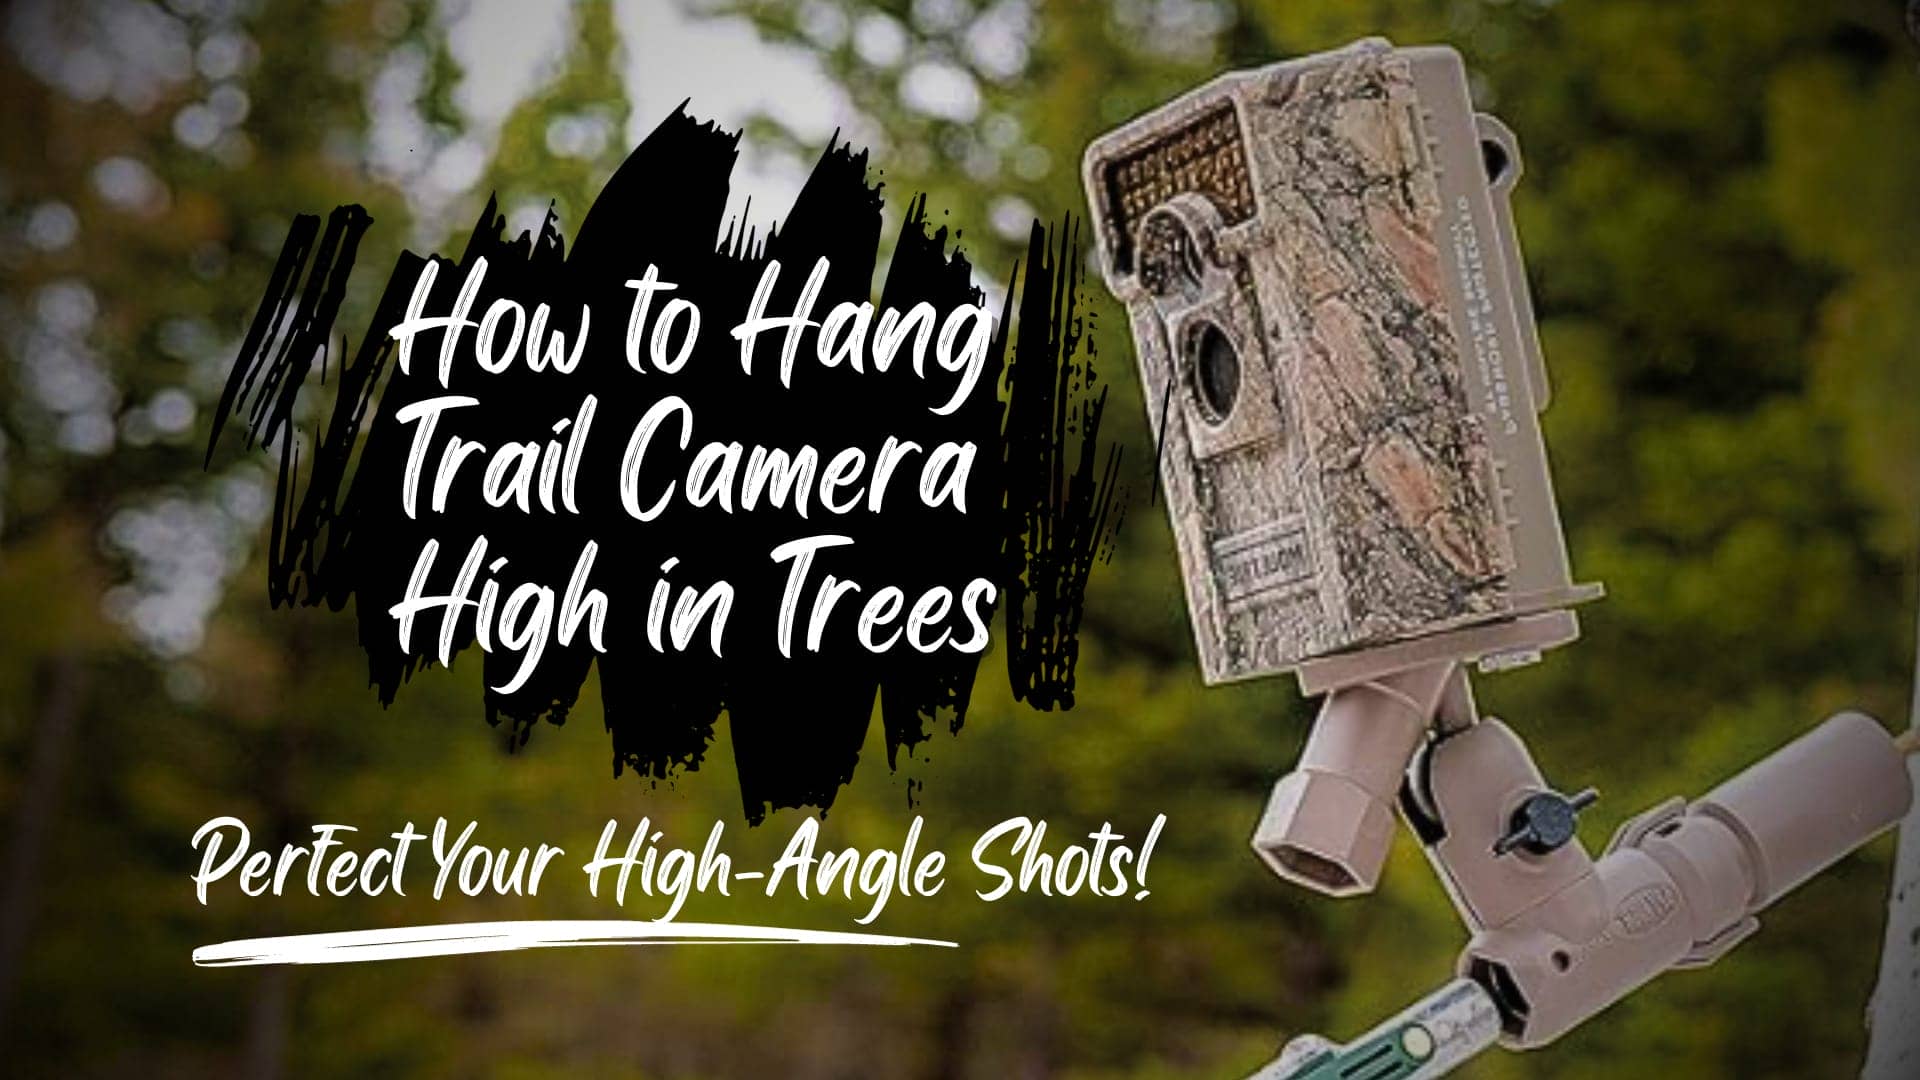 Hanging-Trail-Camera-High-in-Tree-Perfect-Your-High-Angle-Shots